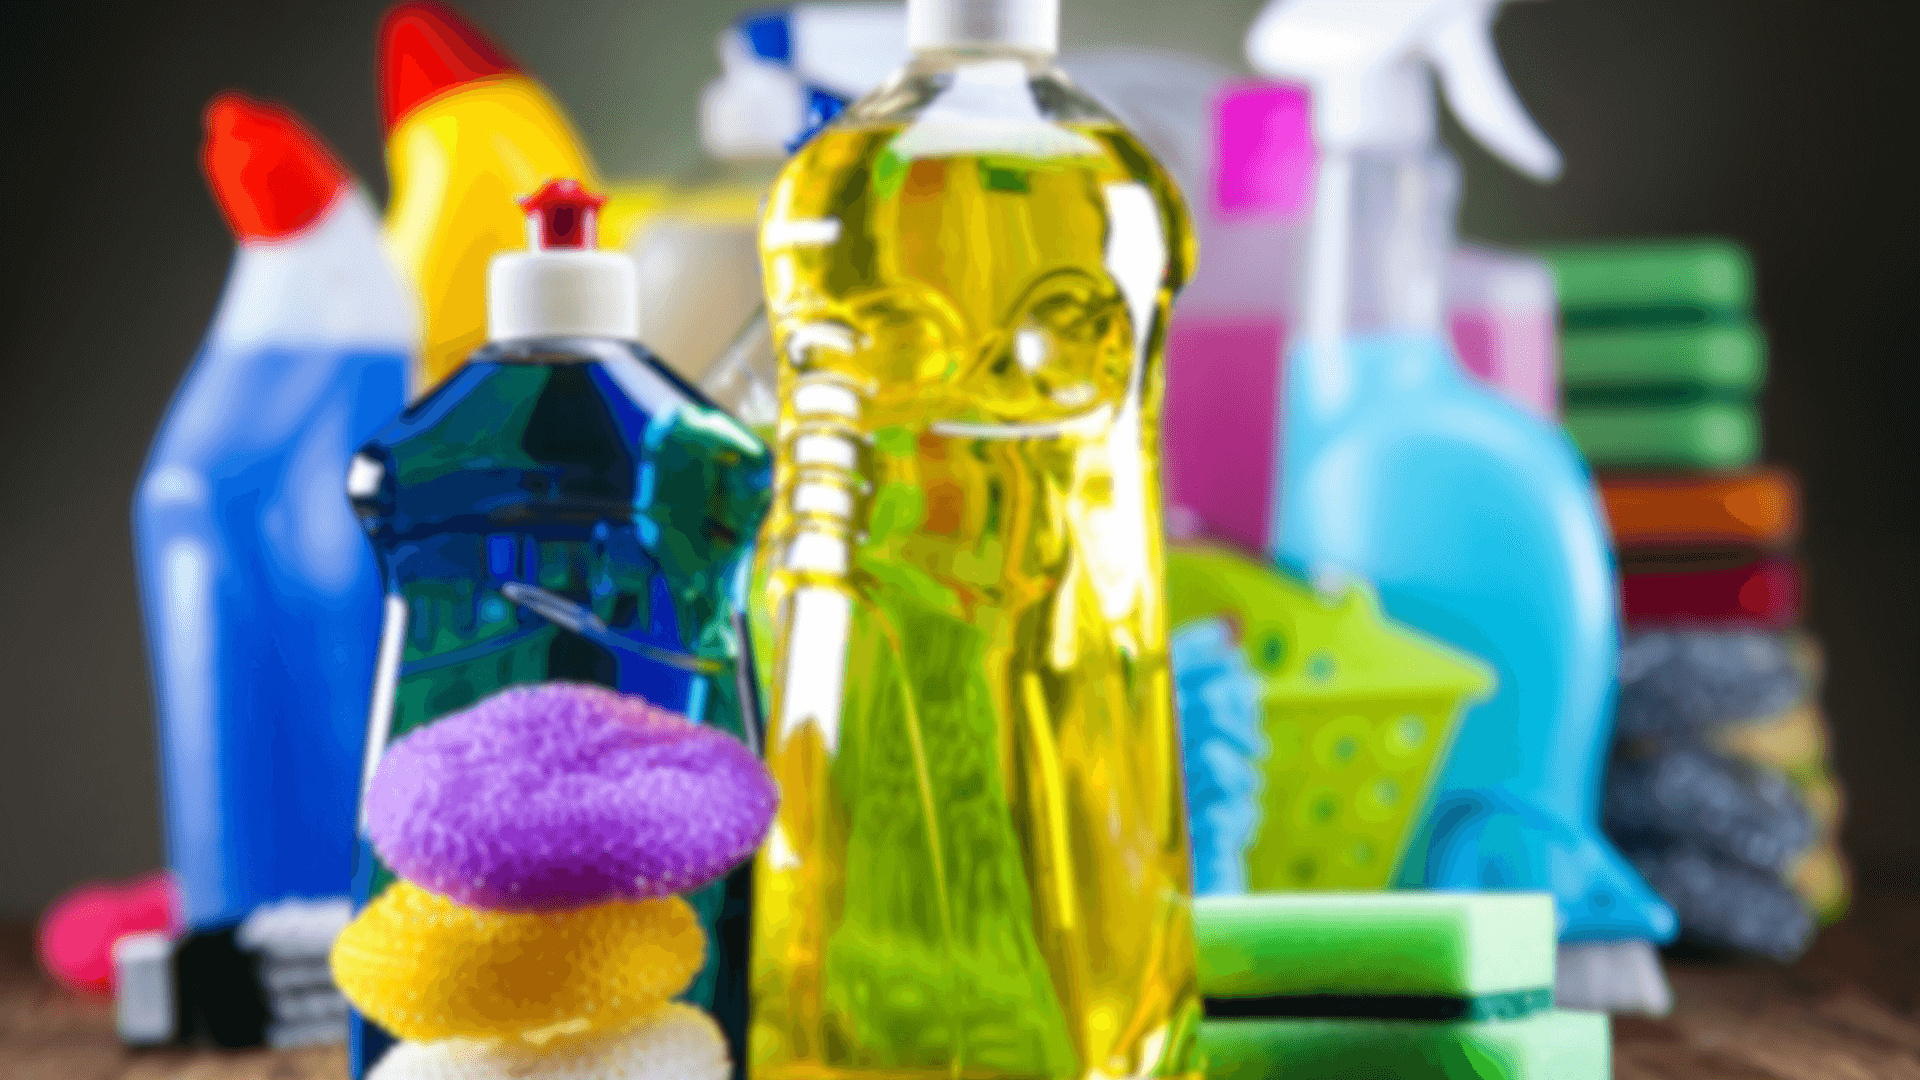 Cleaning Products Harboring Toxic Chemicals